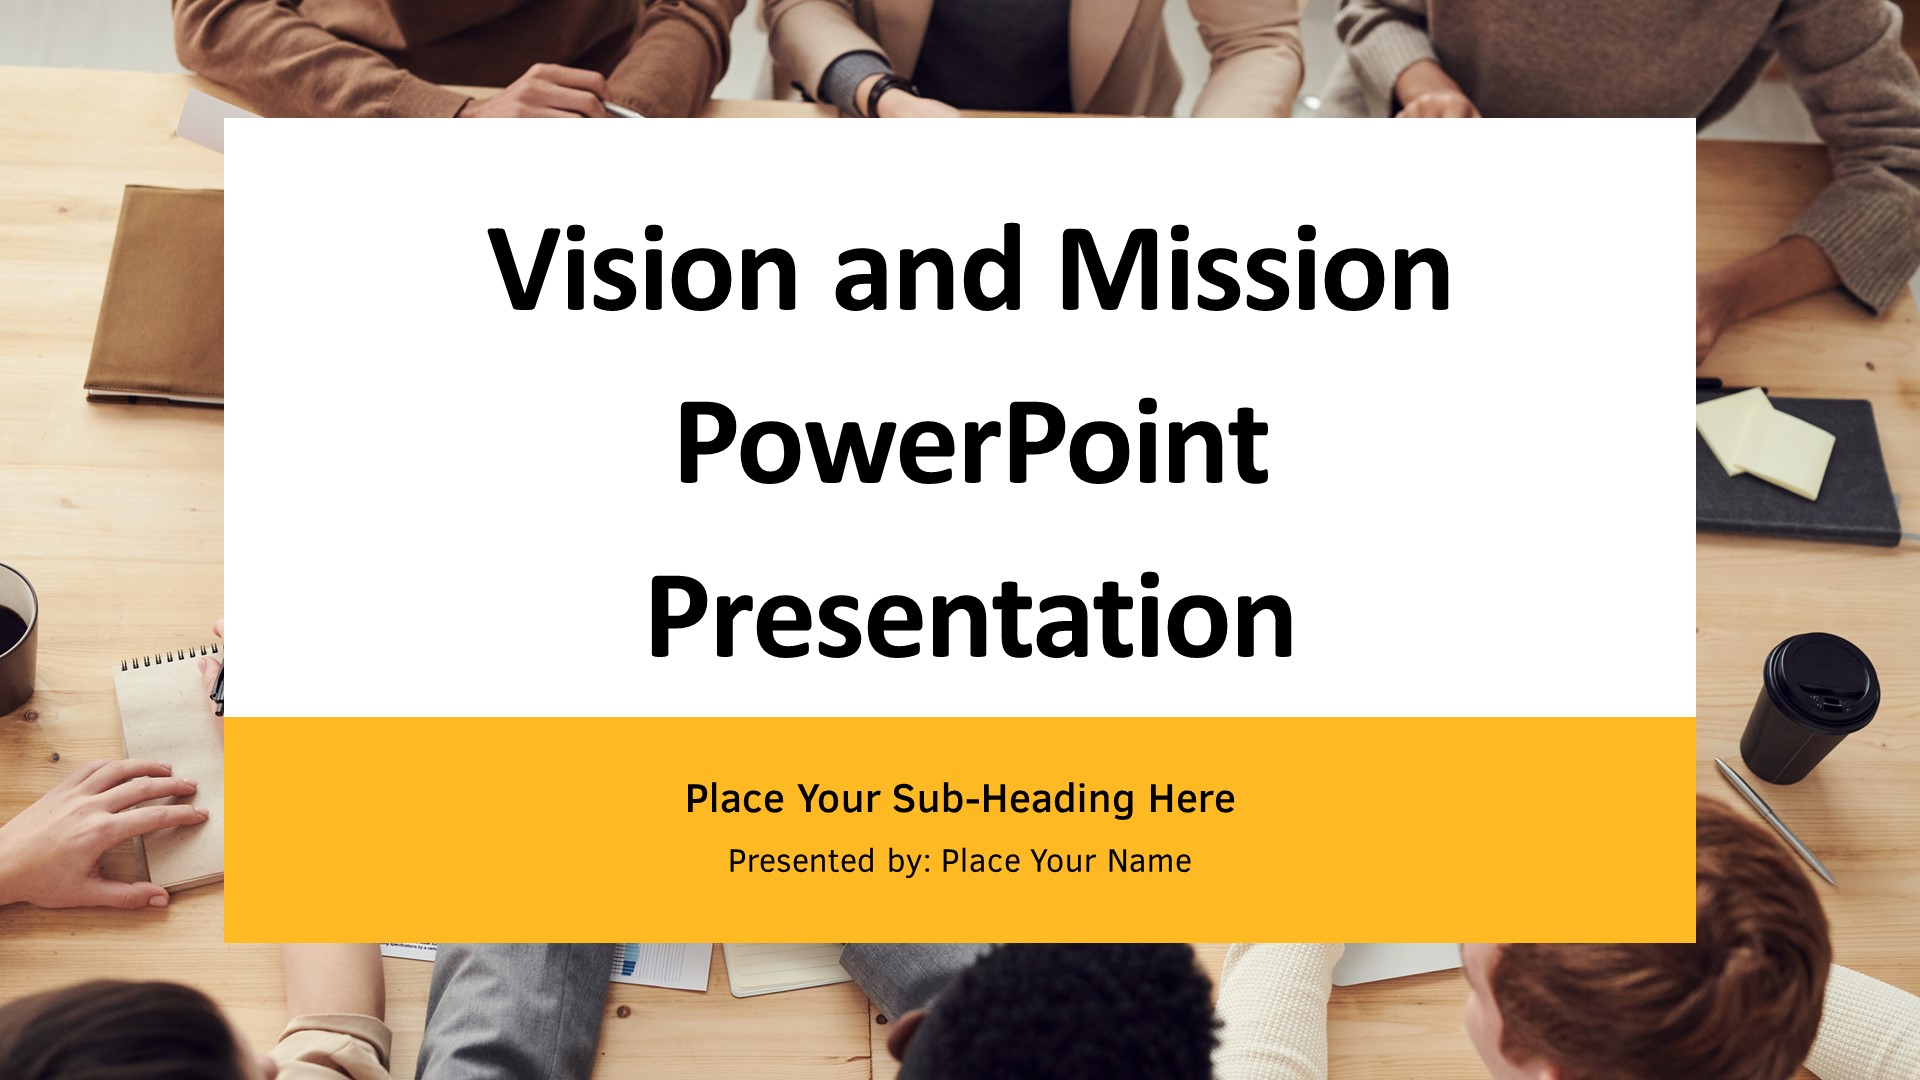 Vision and Mission PowerPoint Presentation